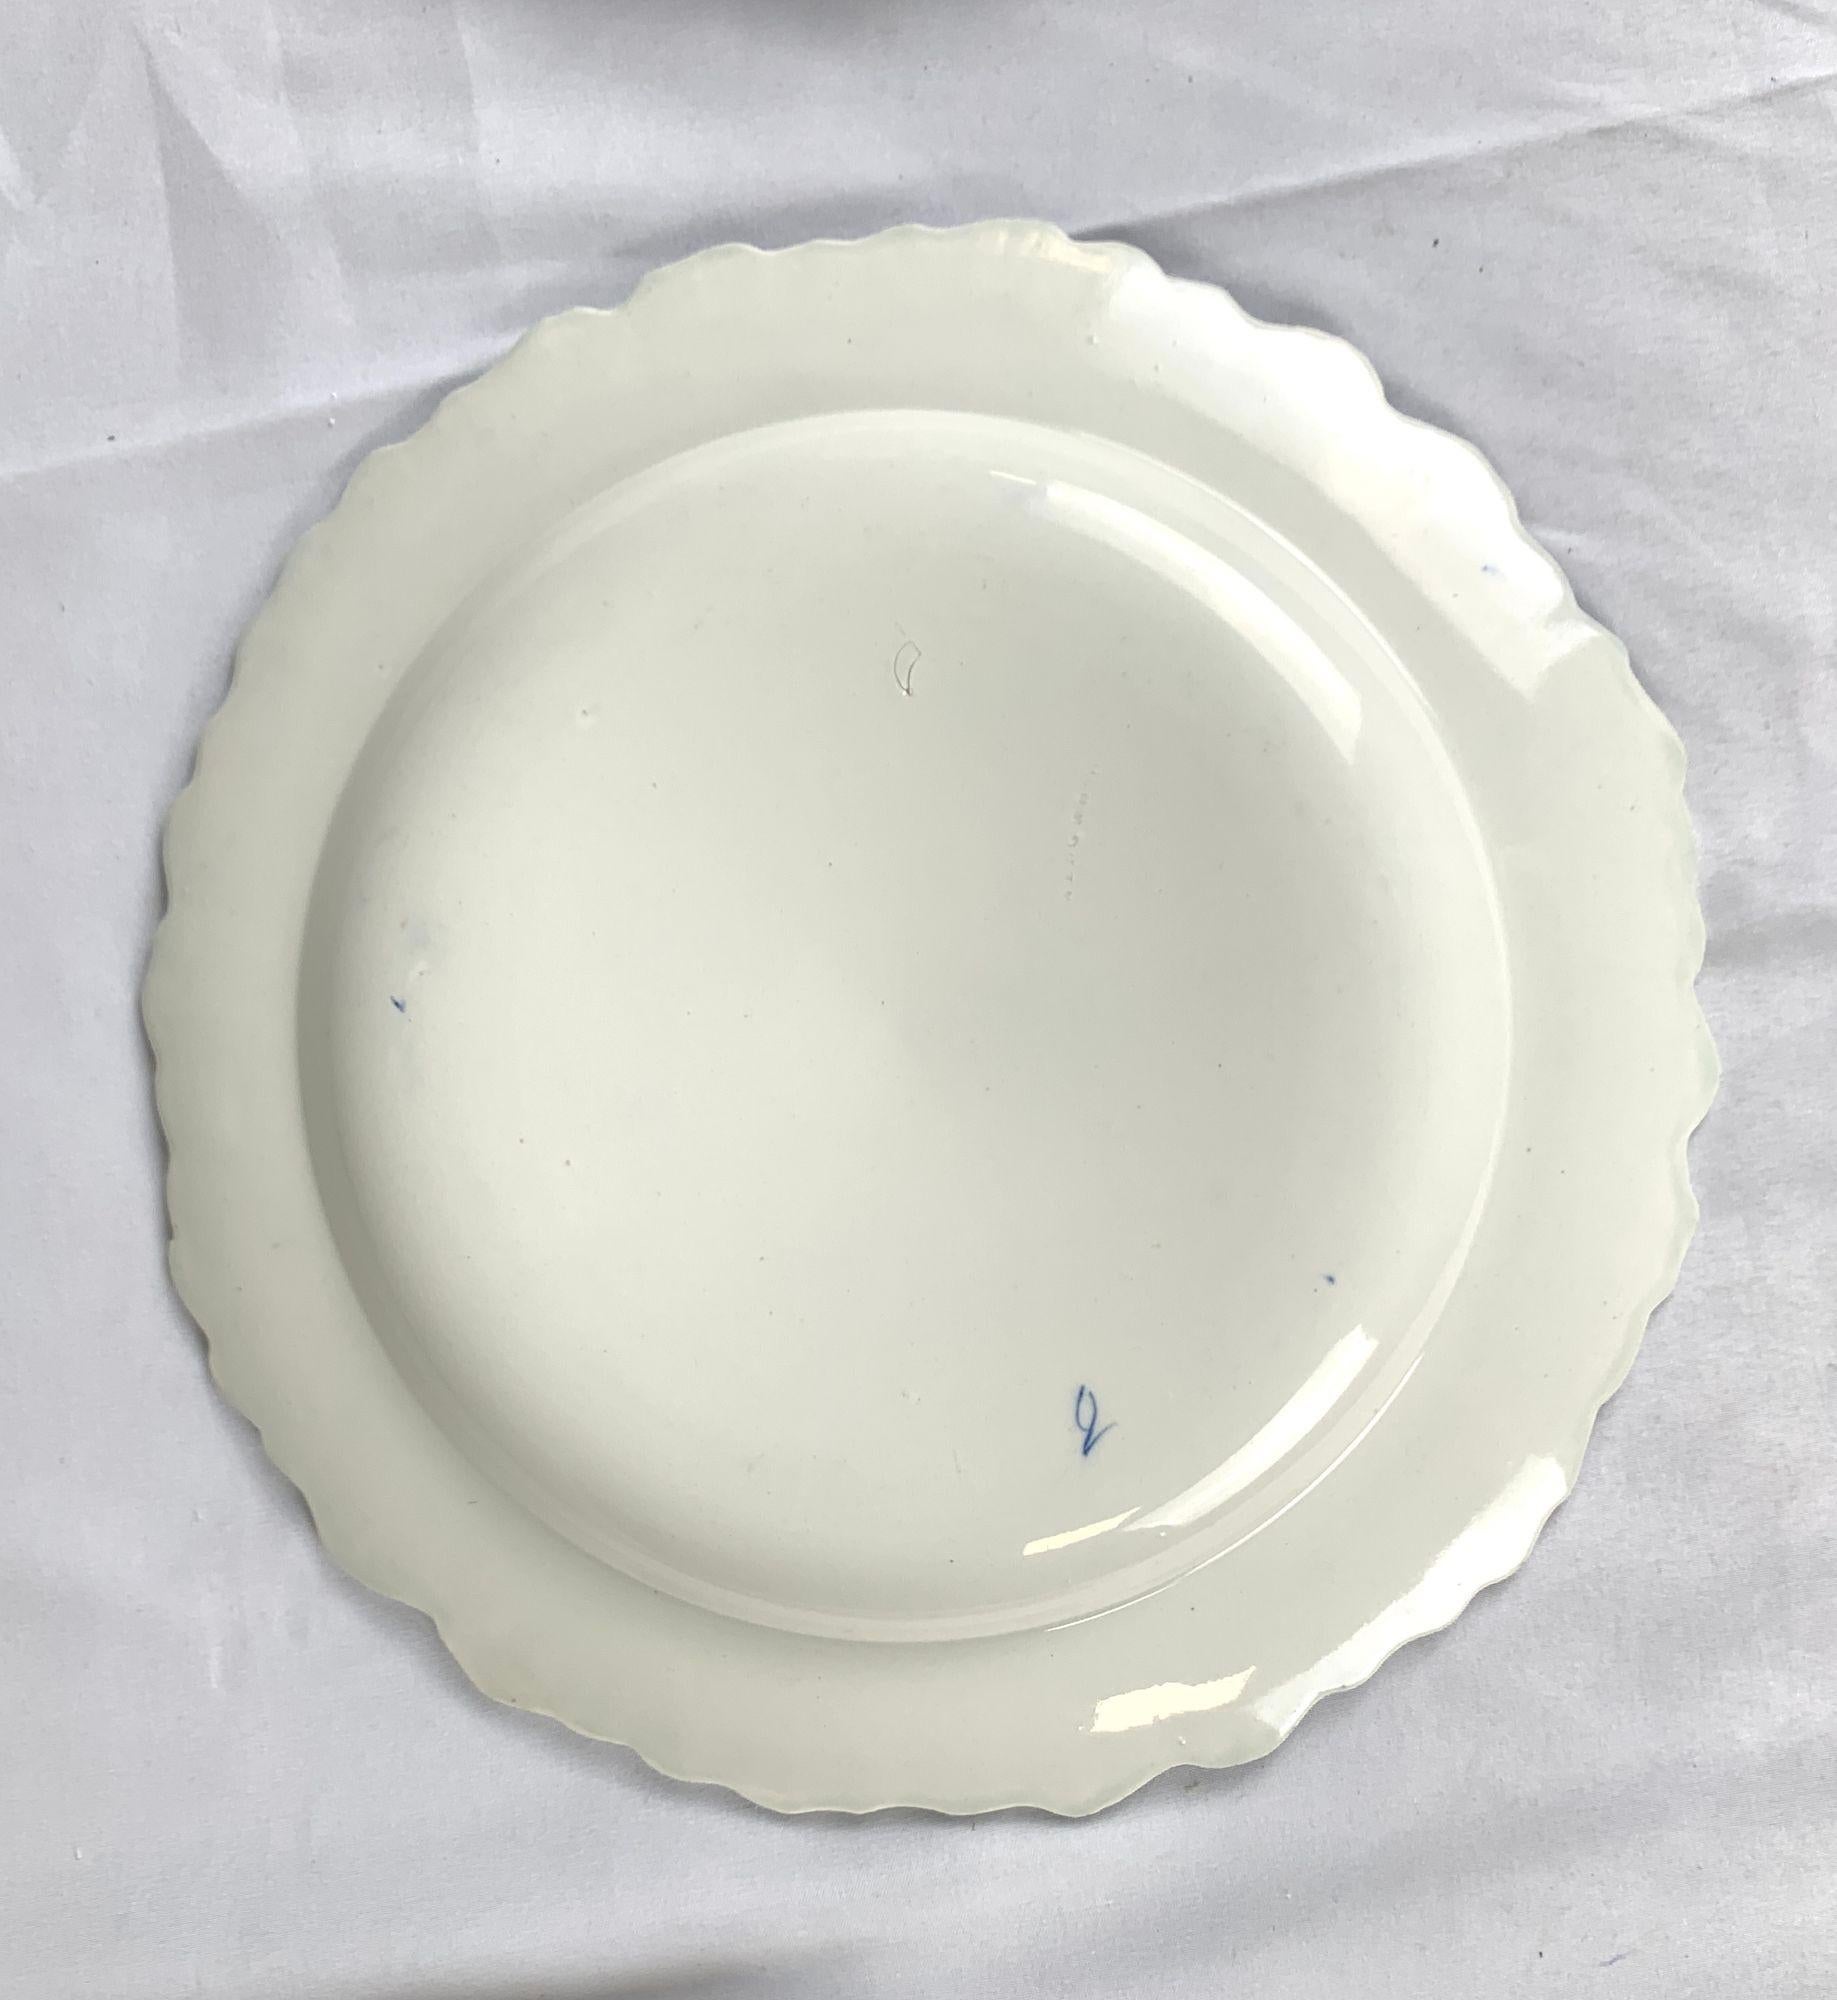 Set Eight Wedgwood Dinner Plates Mared Pattern Made England Circa 1840 For Sale 3